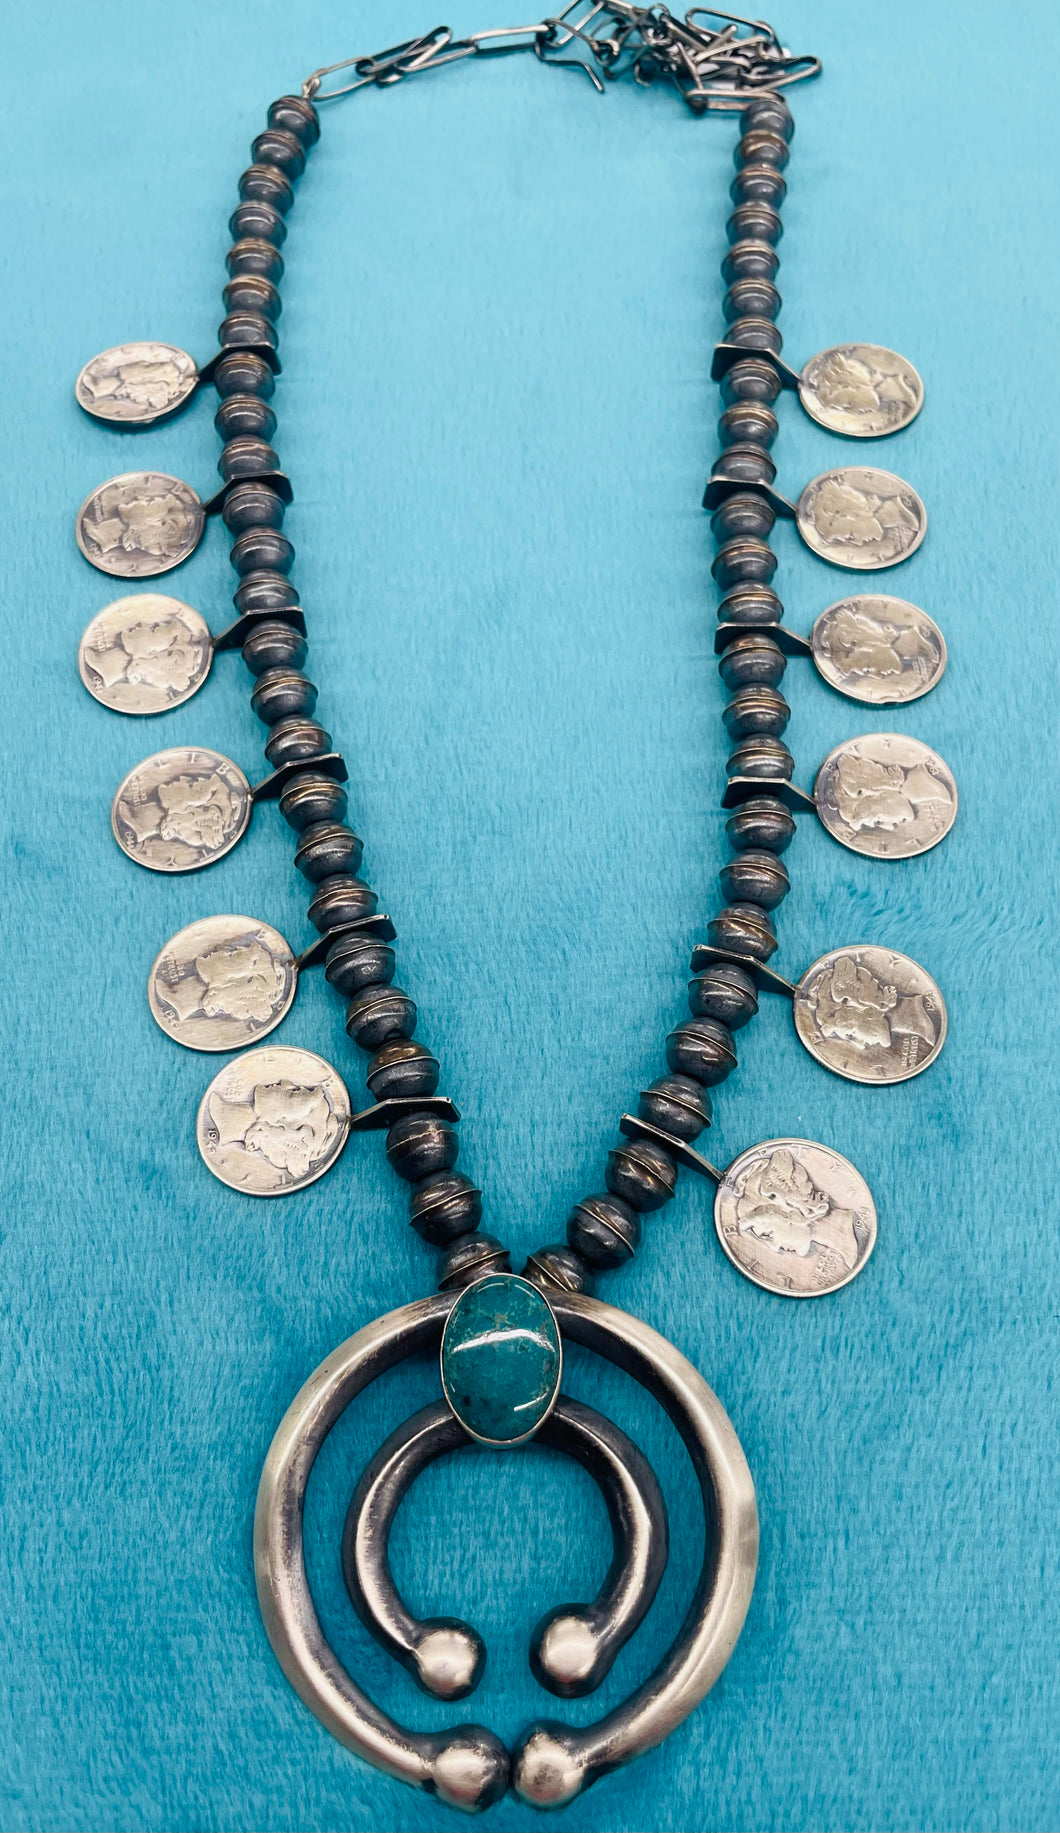 Unique Squash Design with 10 Dimes Silver Beads and Naja with Turquoise Stone